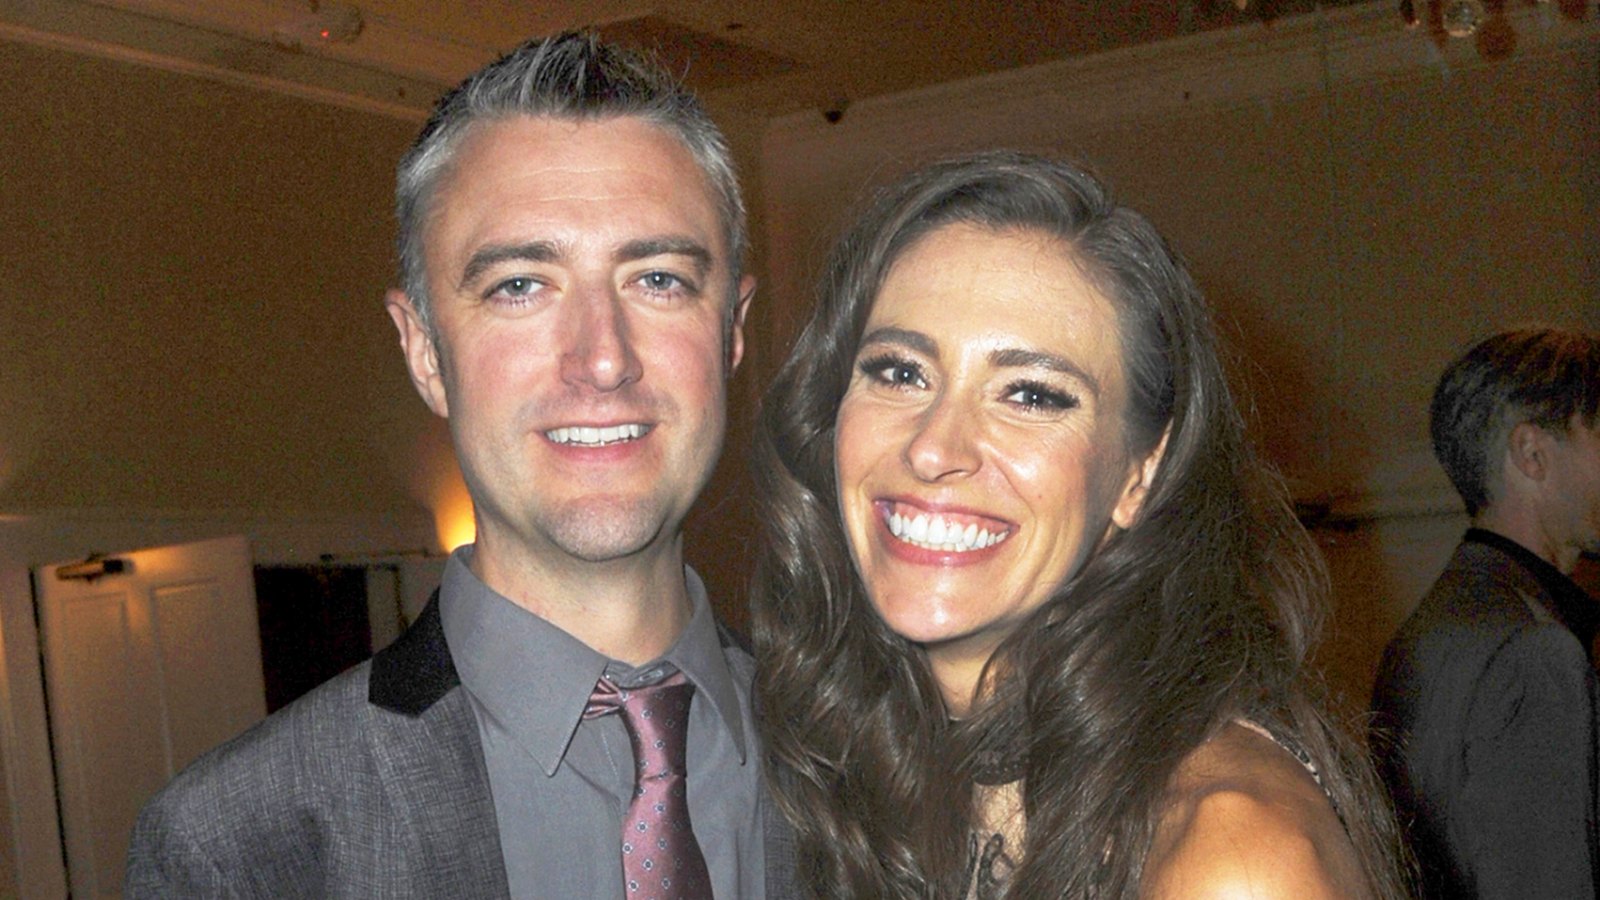 Sean Gunn and Natasha Halevi attend the 43rd Annual Saturn Awards - After Party held at The Castaway in Burbank, California.